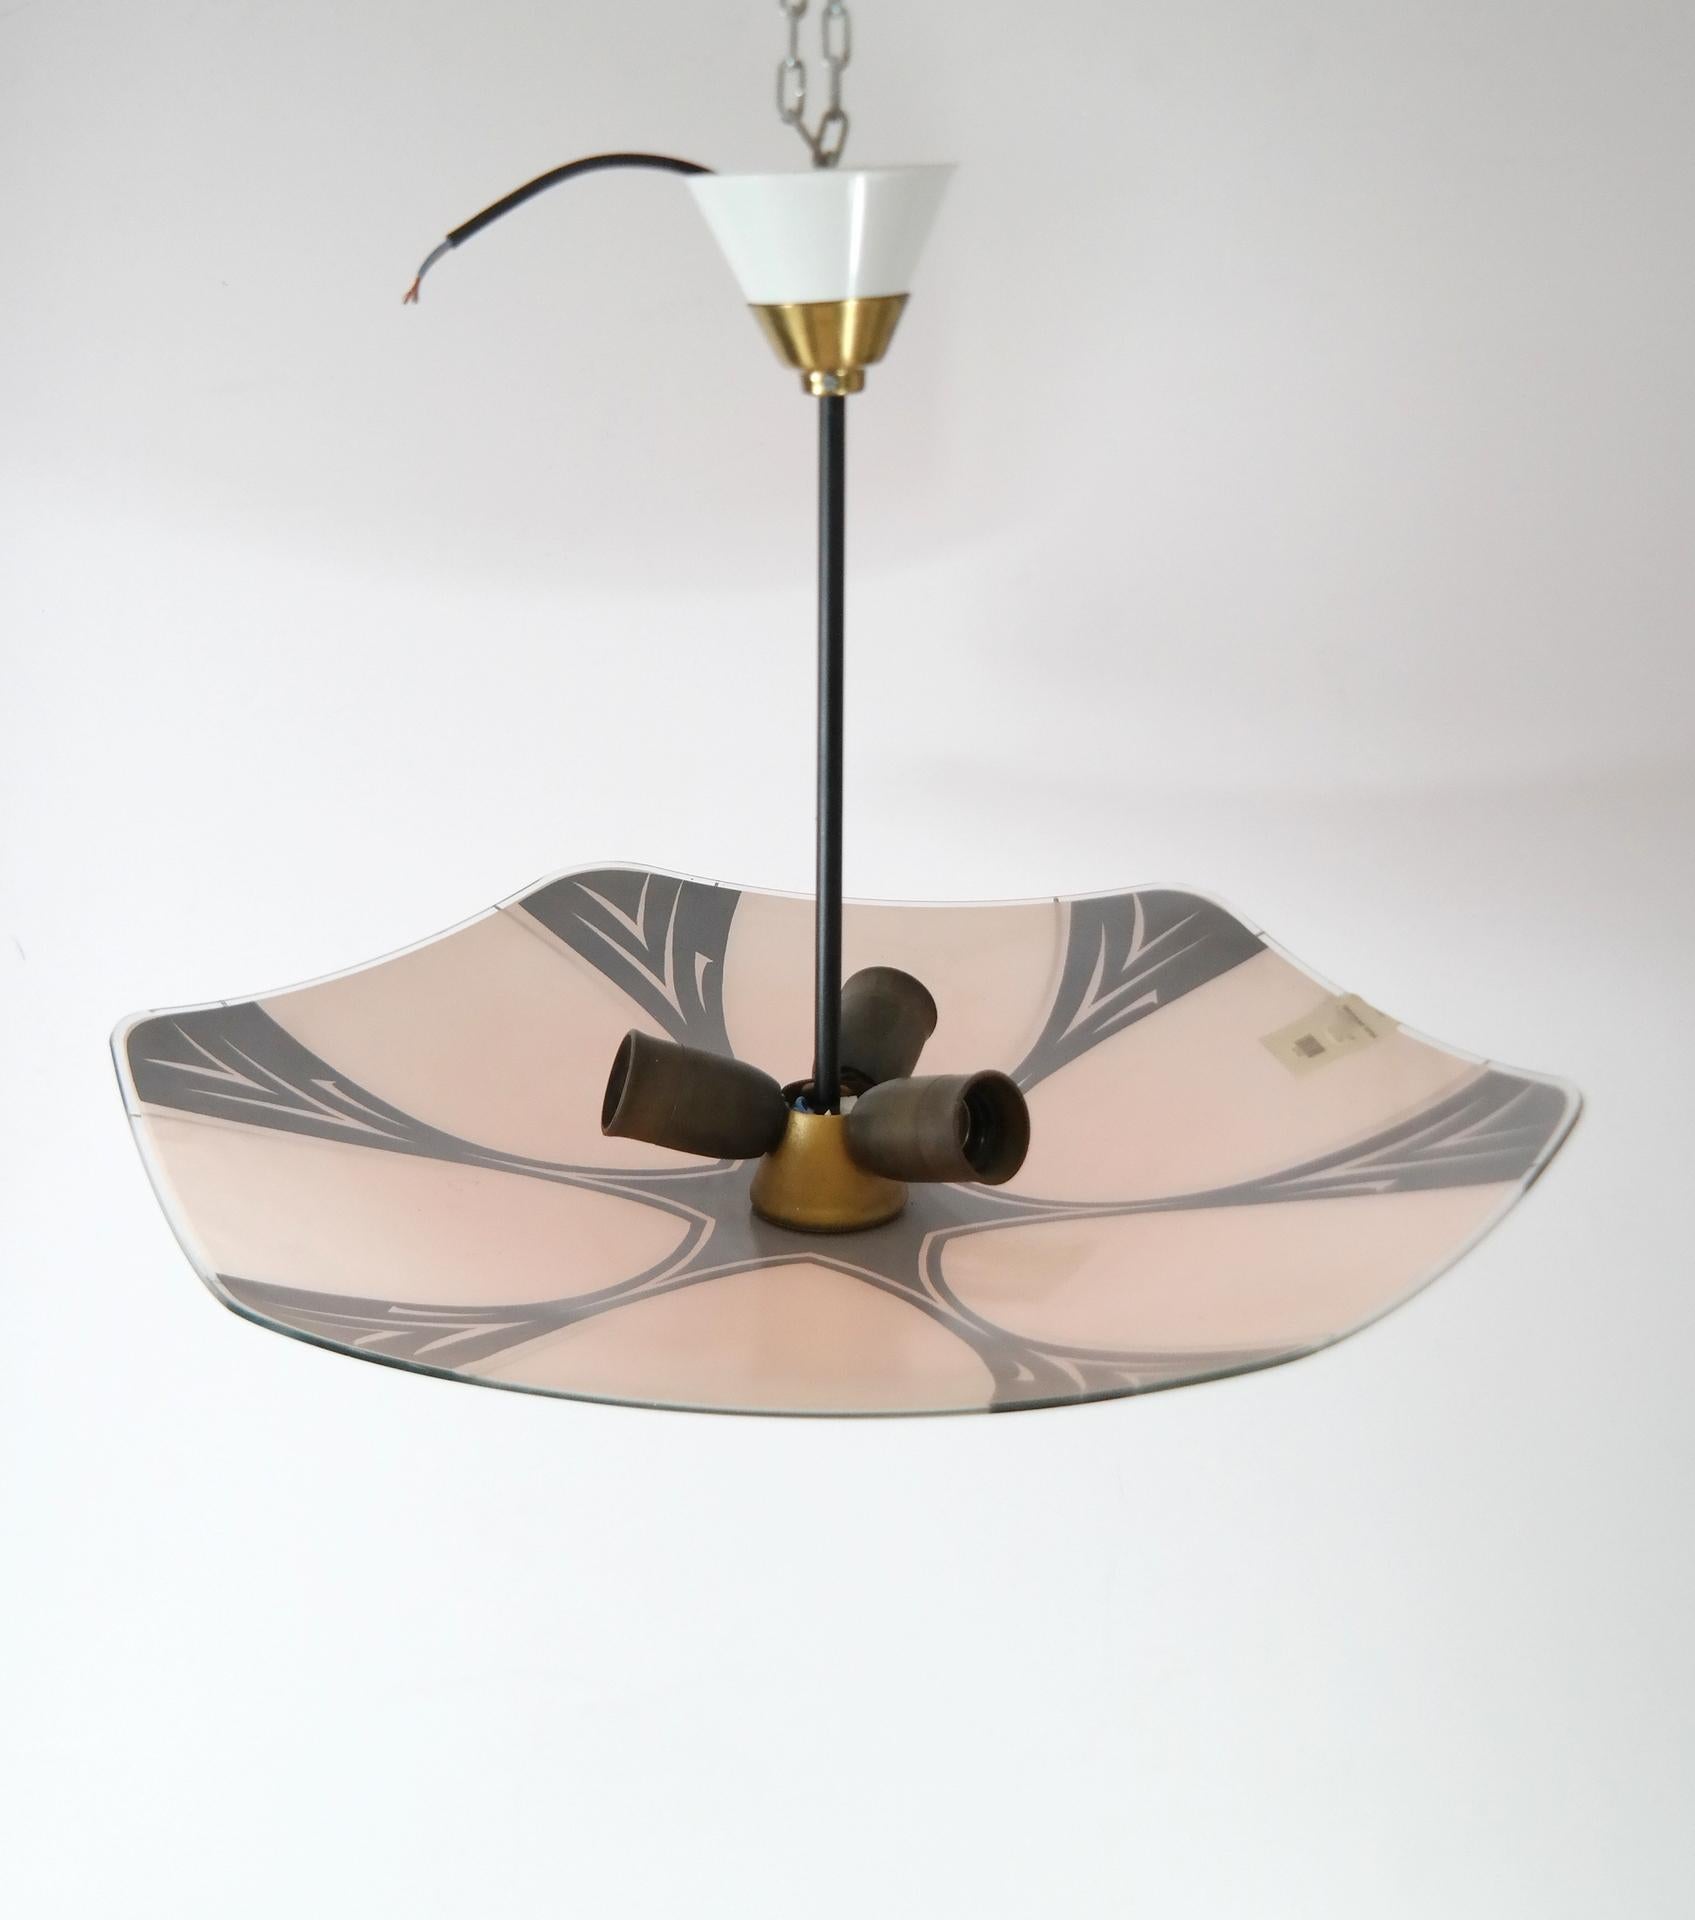 This simplistically beautiful Mid-Century light piece resembles a glass umbrella hanging from the ceiling. While technically a chandelier, because it has three light sources, this vintage piece from the 1960s can be mistaken for a pendant light as